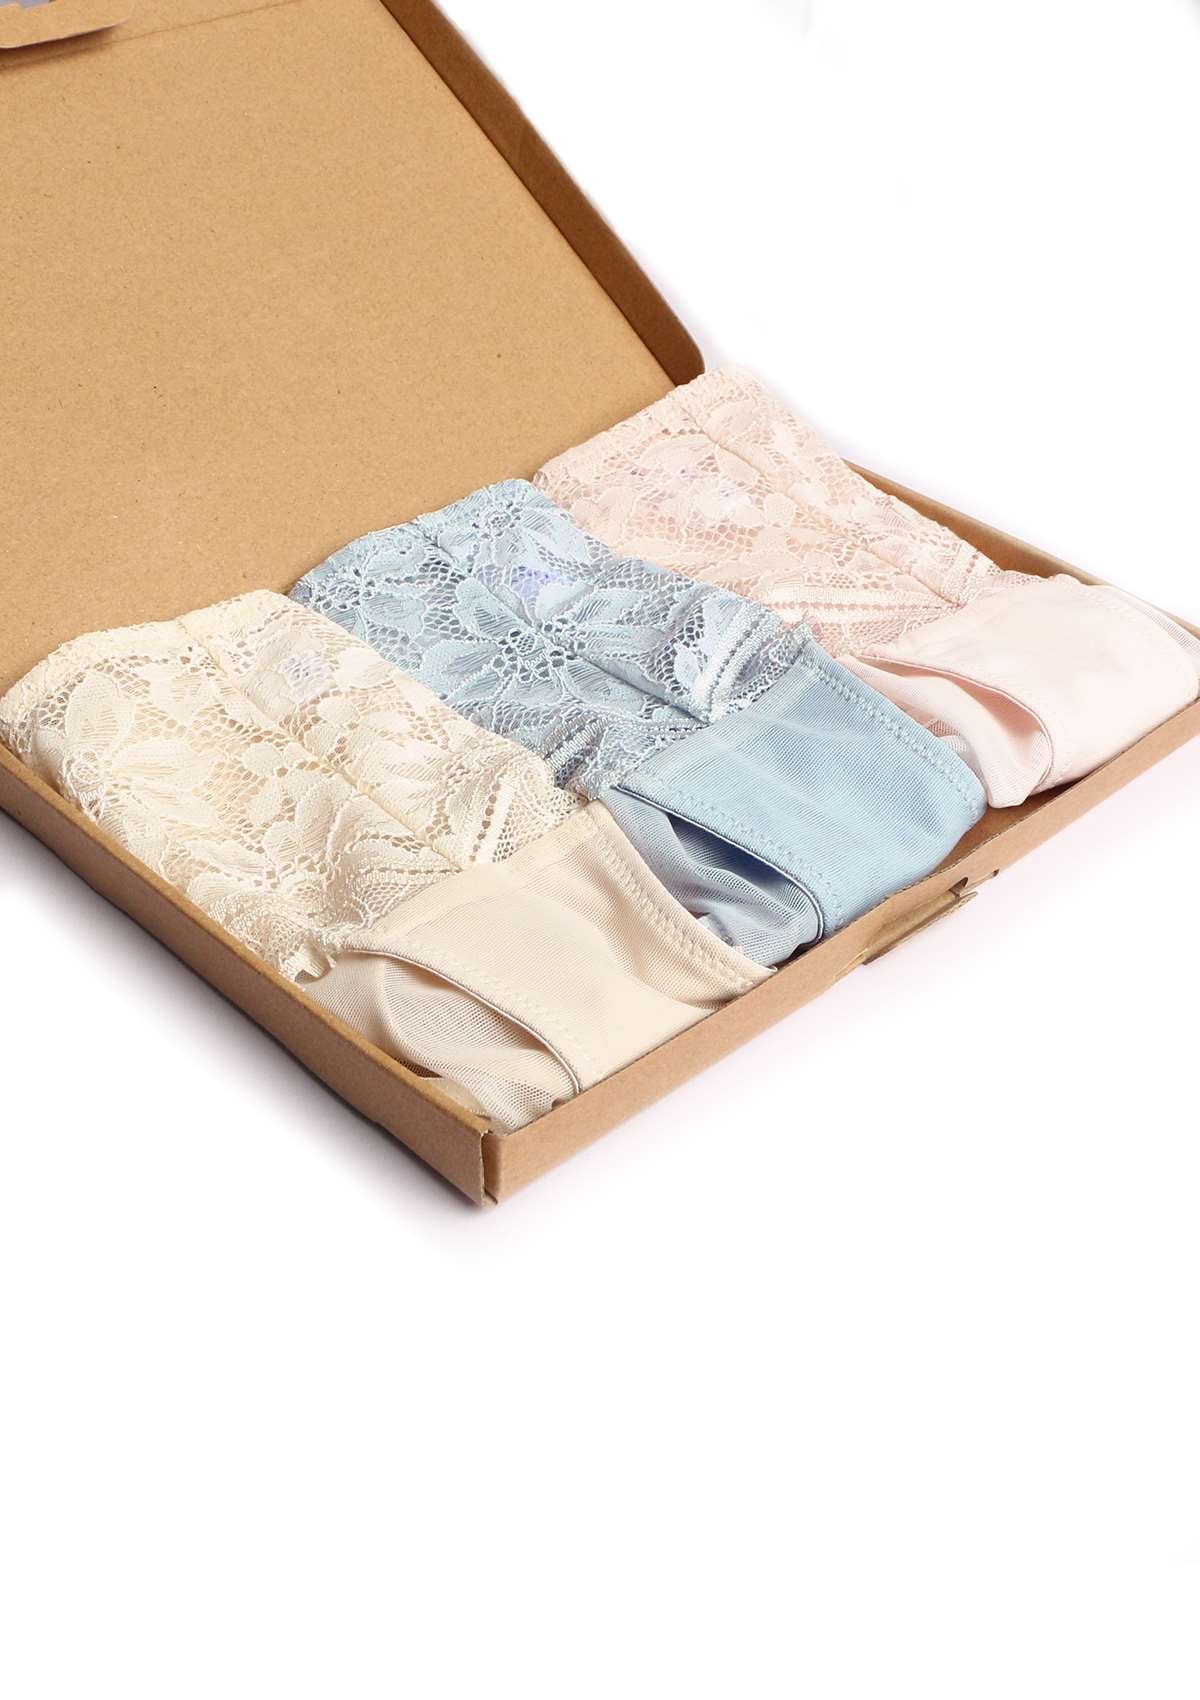 HSIA Silene Sheer Lace Mesh Hipster Underwear 3 Pack - XL / Light Blue+Champagne+Light Pink